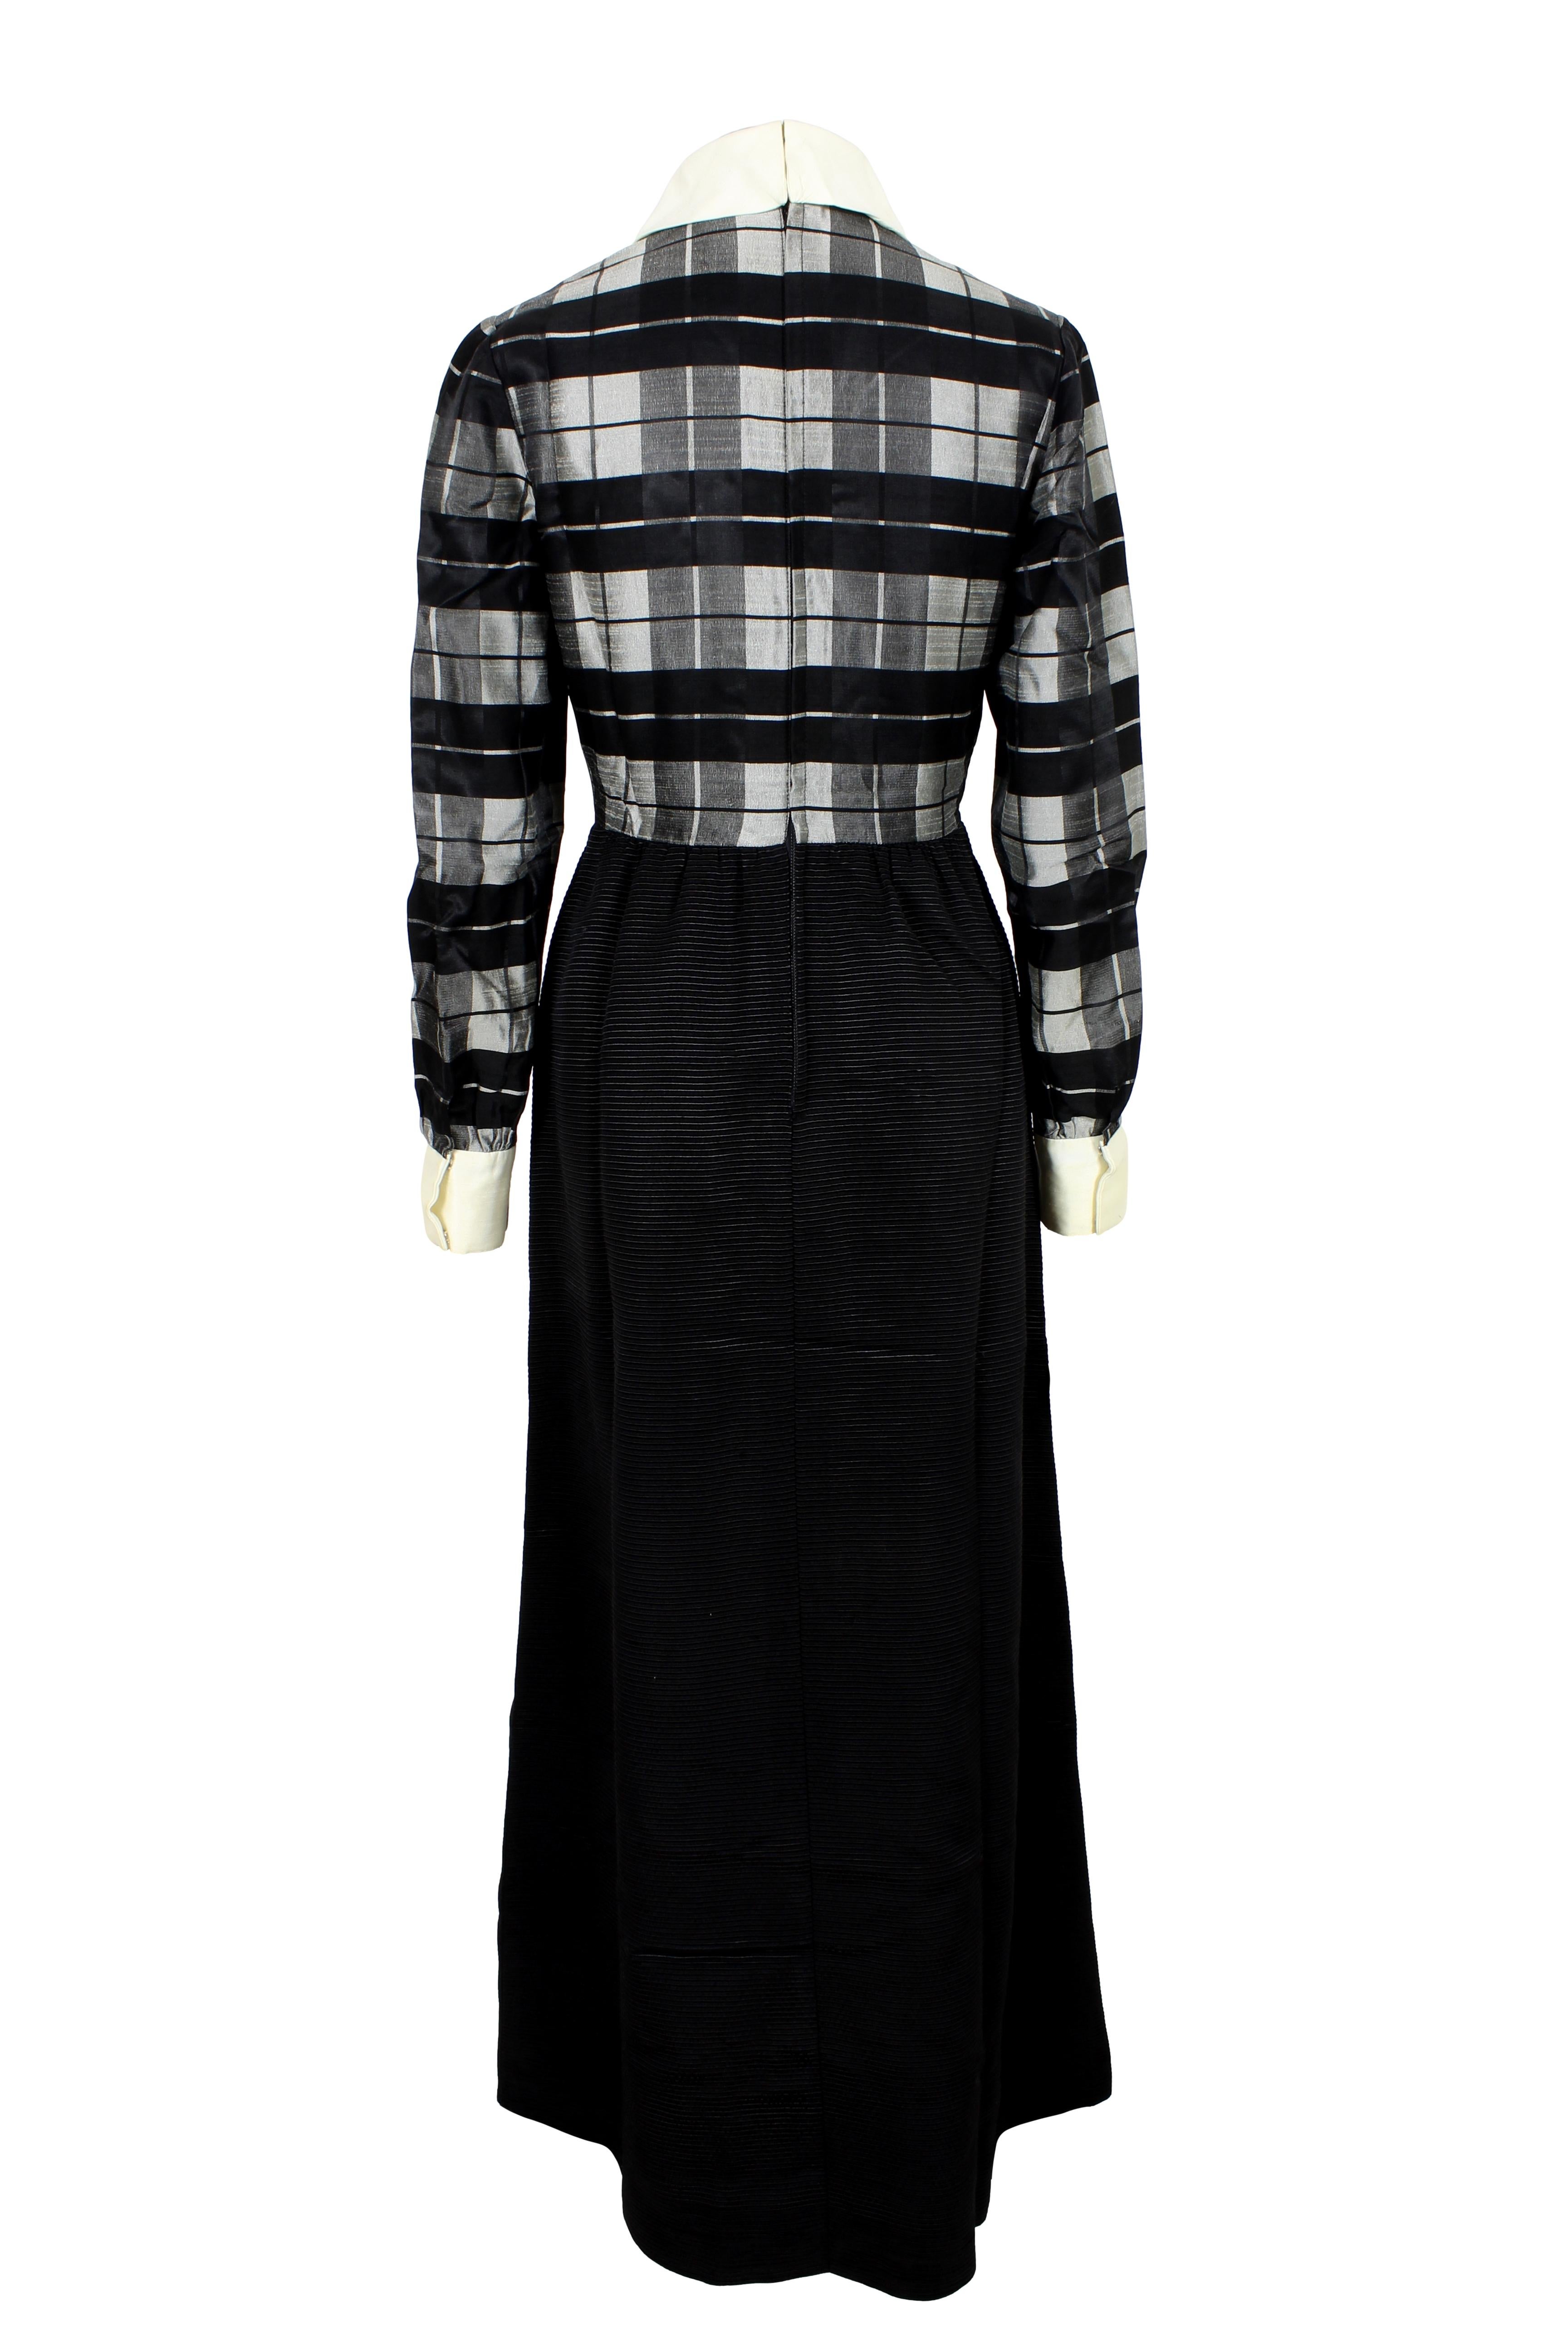 Jean Varon vintage 70s long dress. Elegant dress with gray and black bodice with checked pattern, beige collar and cuffs and clip closure. Along the bust there are small fabric button. The long black flared skirt. Fabric 57% acetate, 43% viscose.